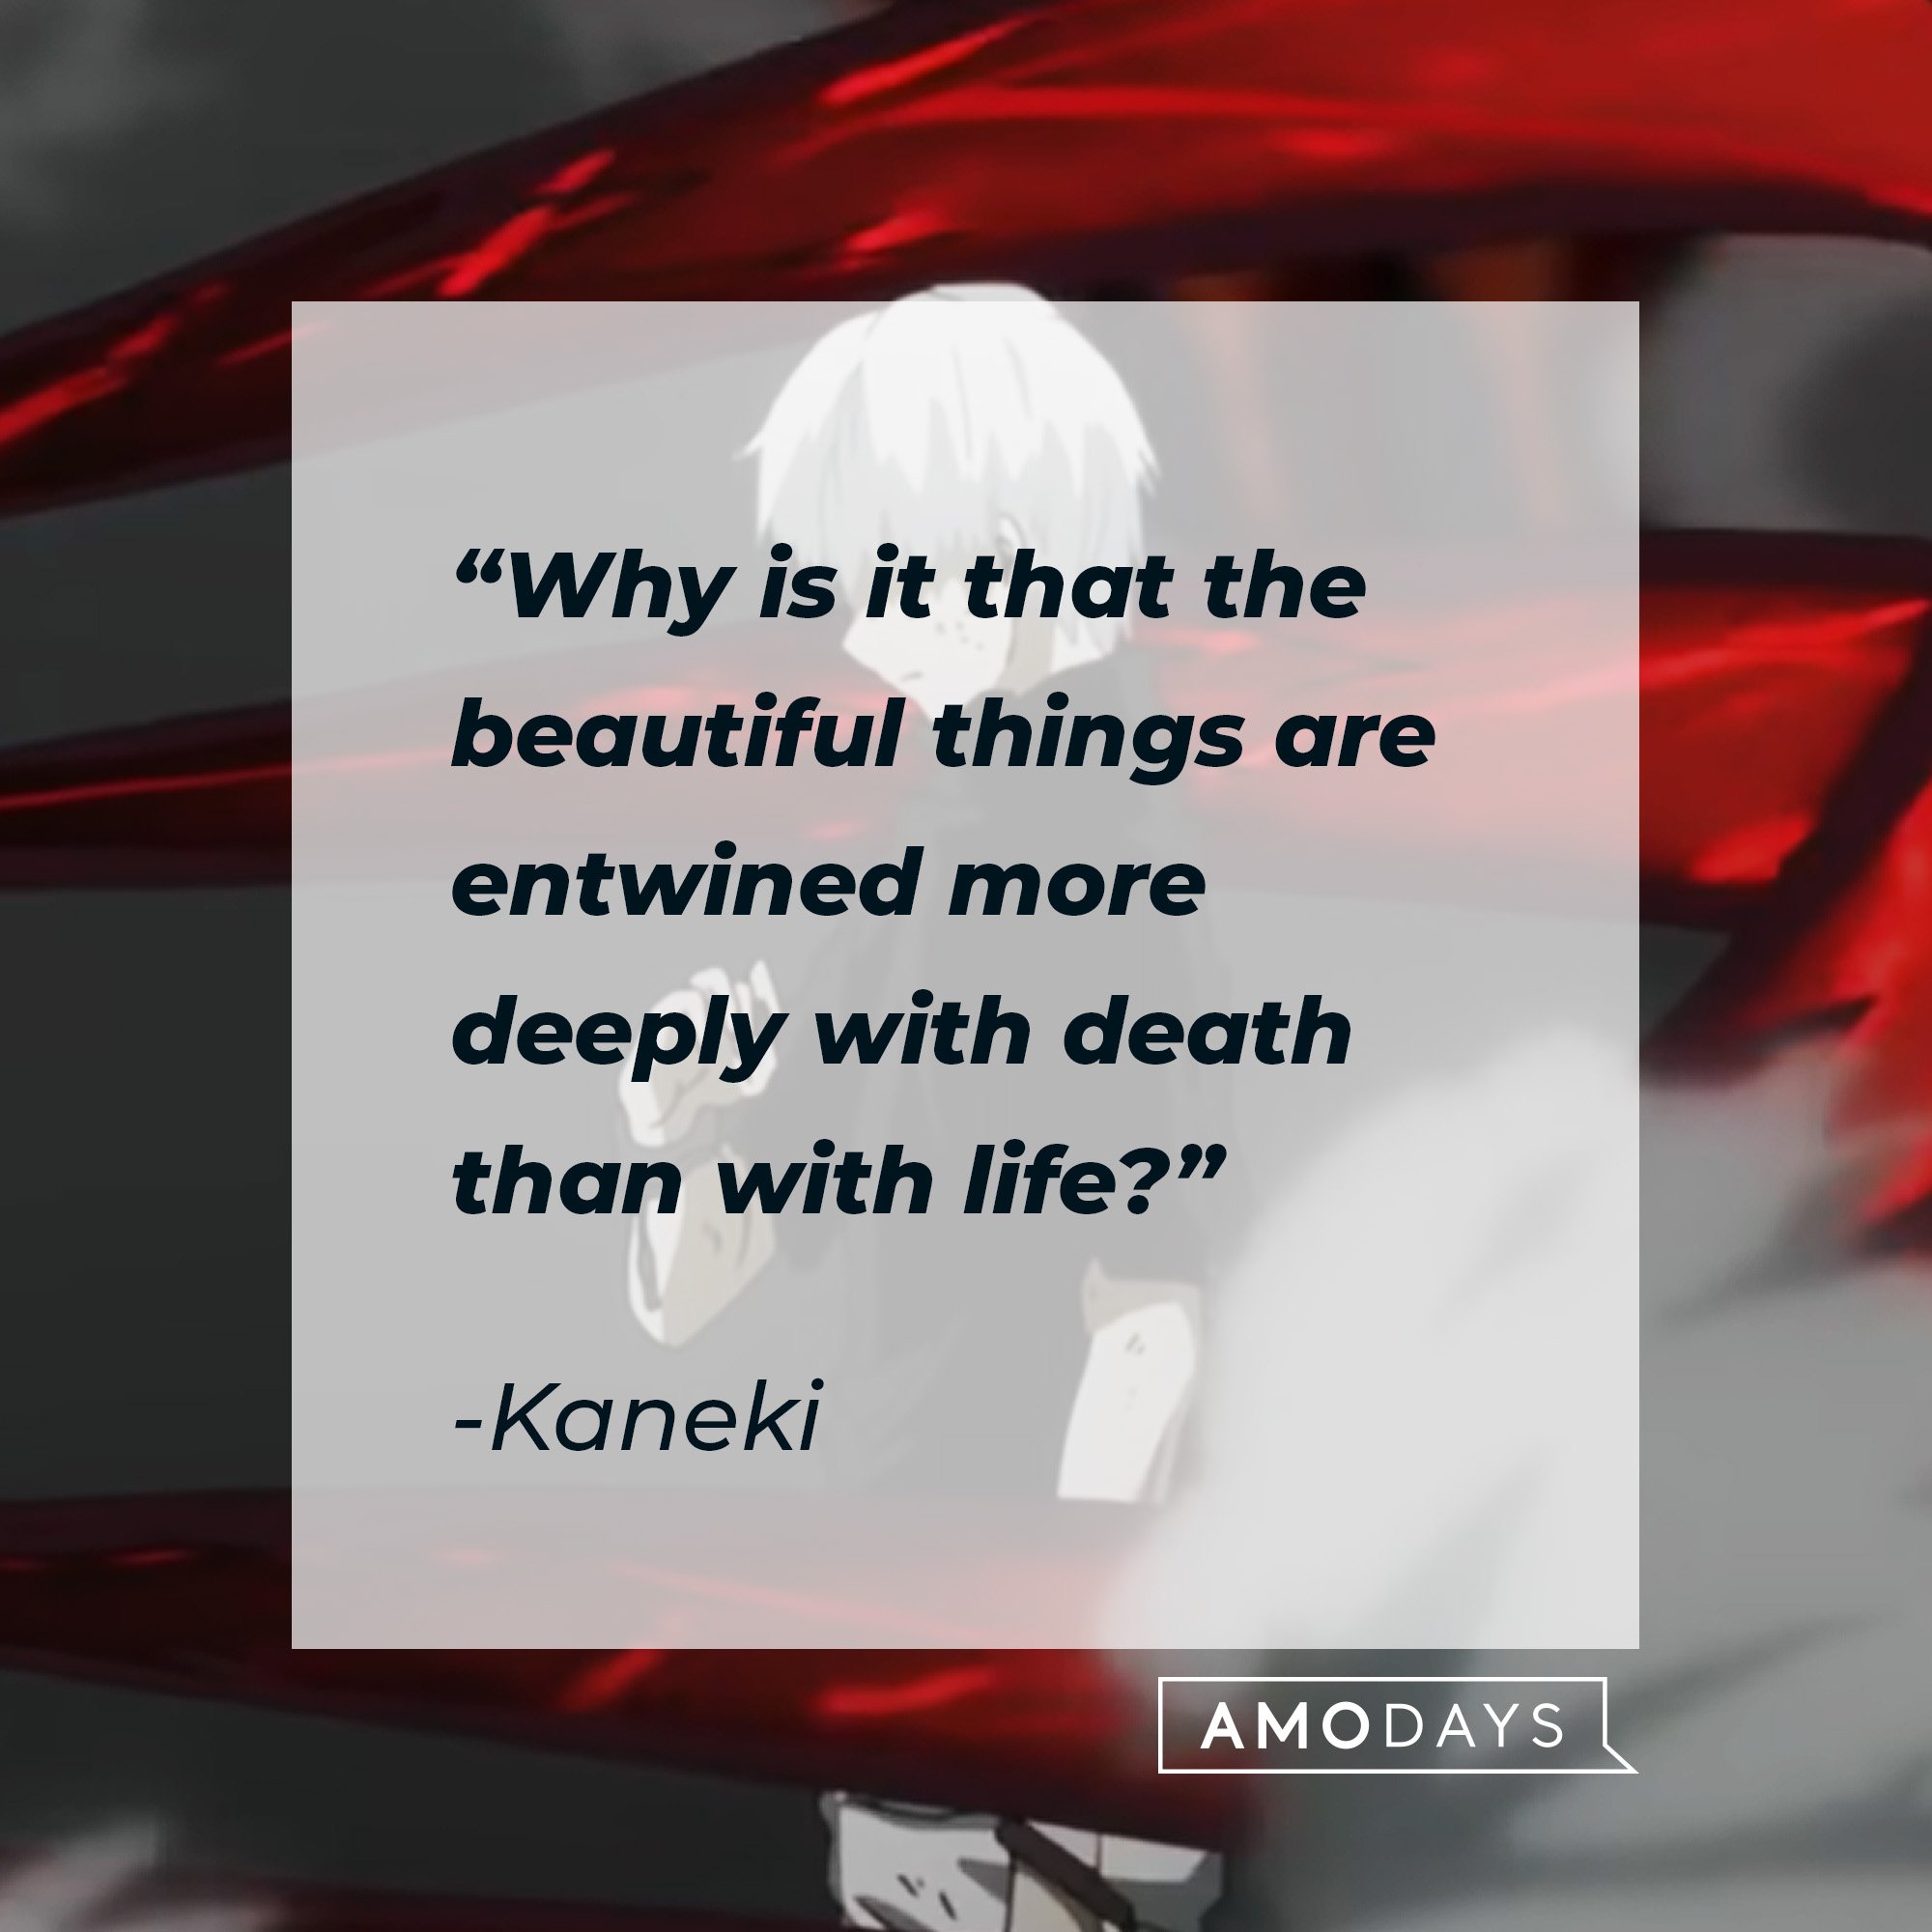 Kaneki's quote: "Why is it that the beautiful things are entwined more deeply with death than with life?" | Image: AmoDays